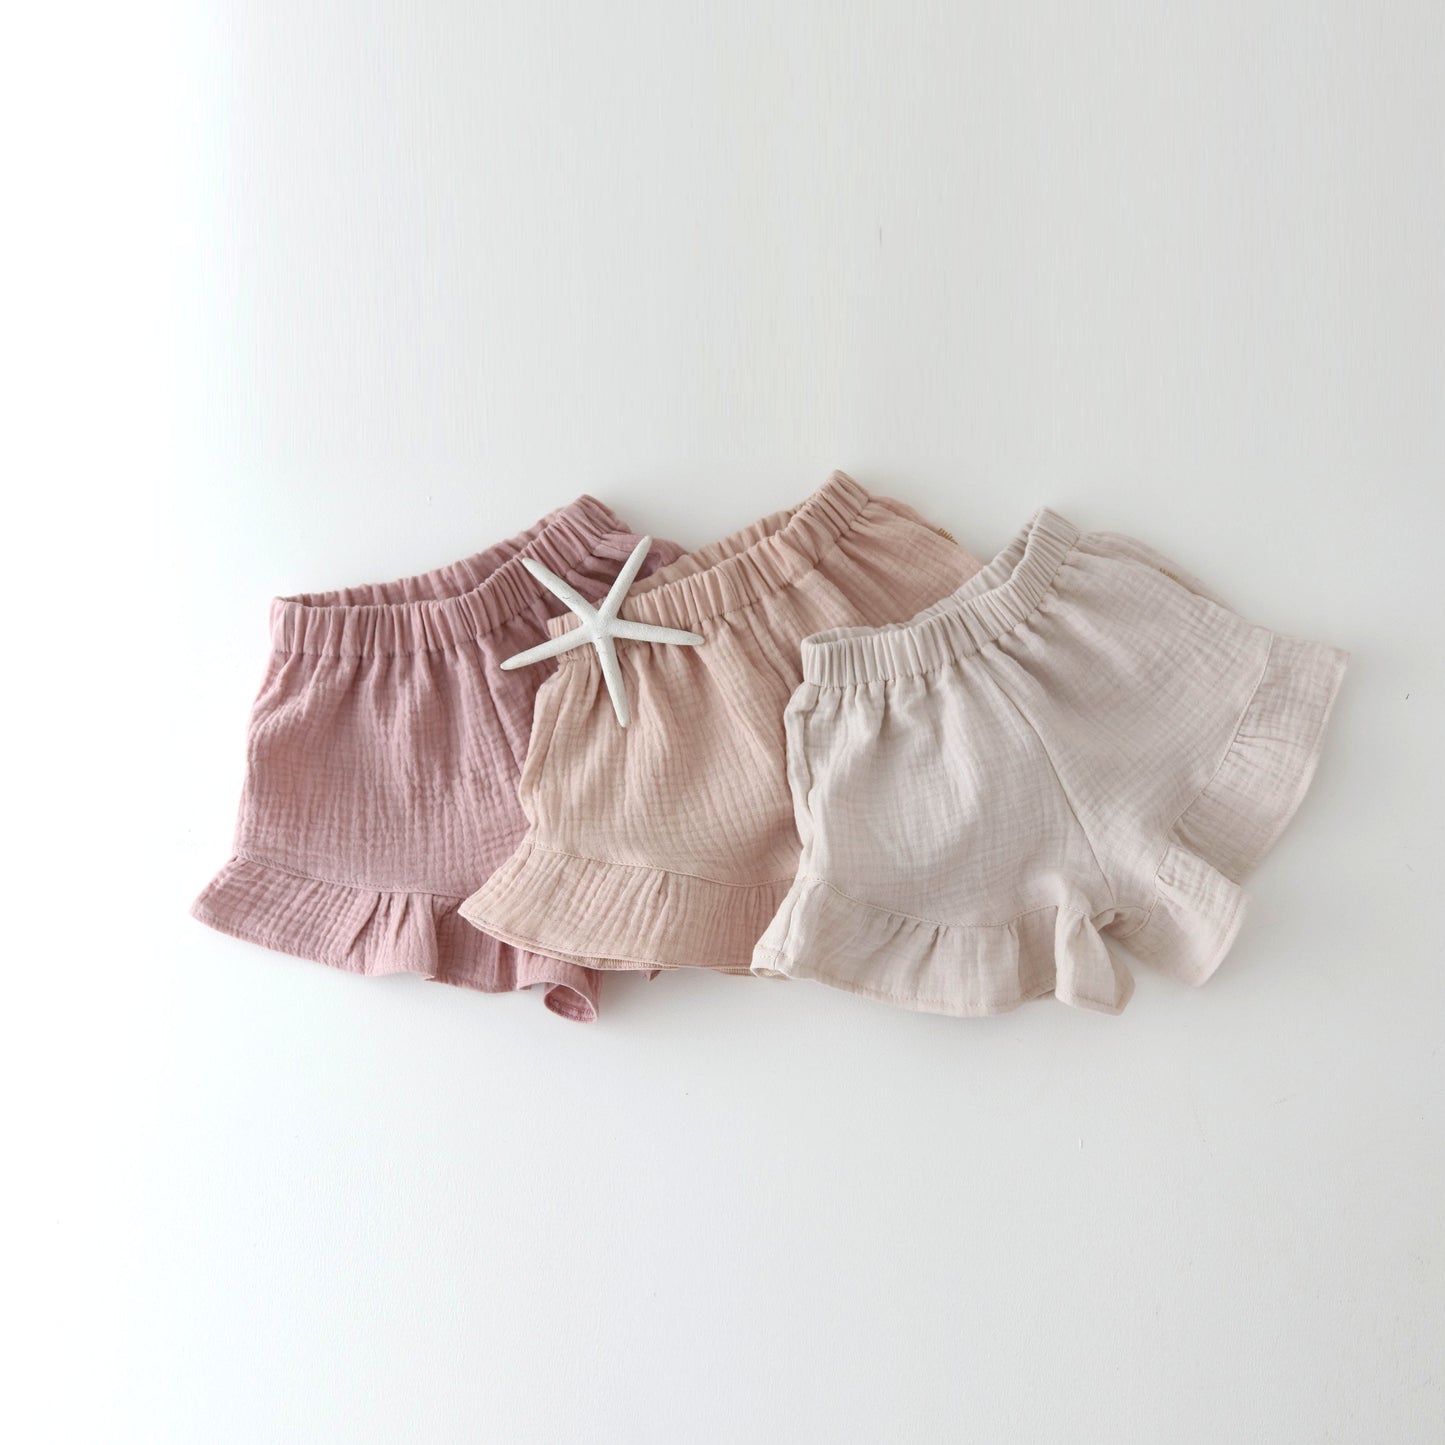 Muslin shorts with a ruffle - NUDE - LAST PAIR